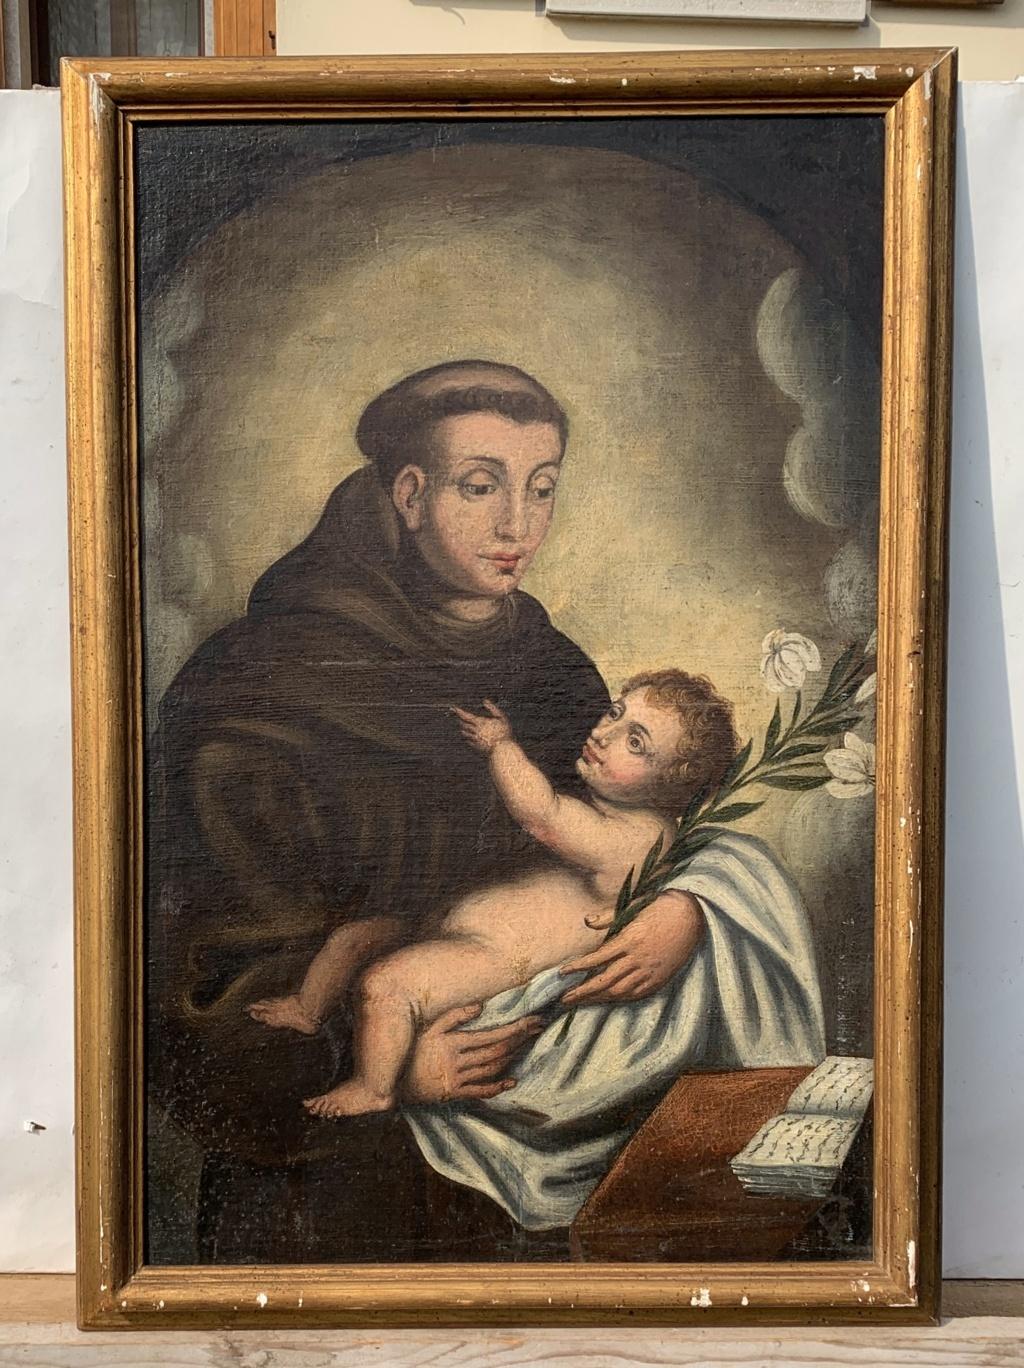 18th century Italian figure painting - Saint Anthony of Padua with Child - Painting by Unknown